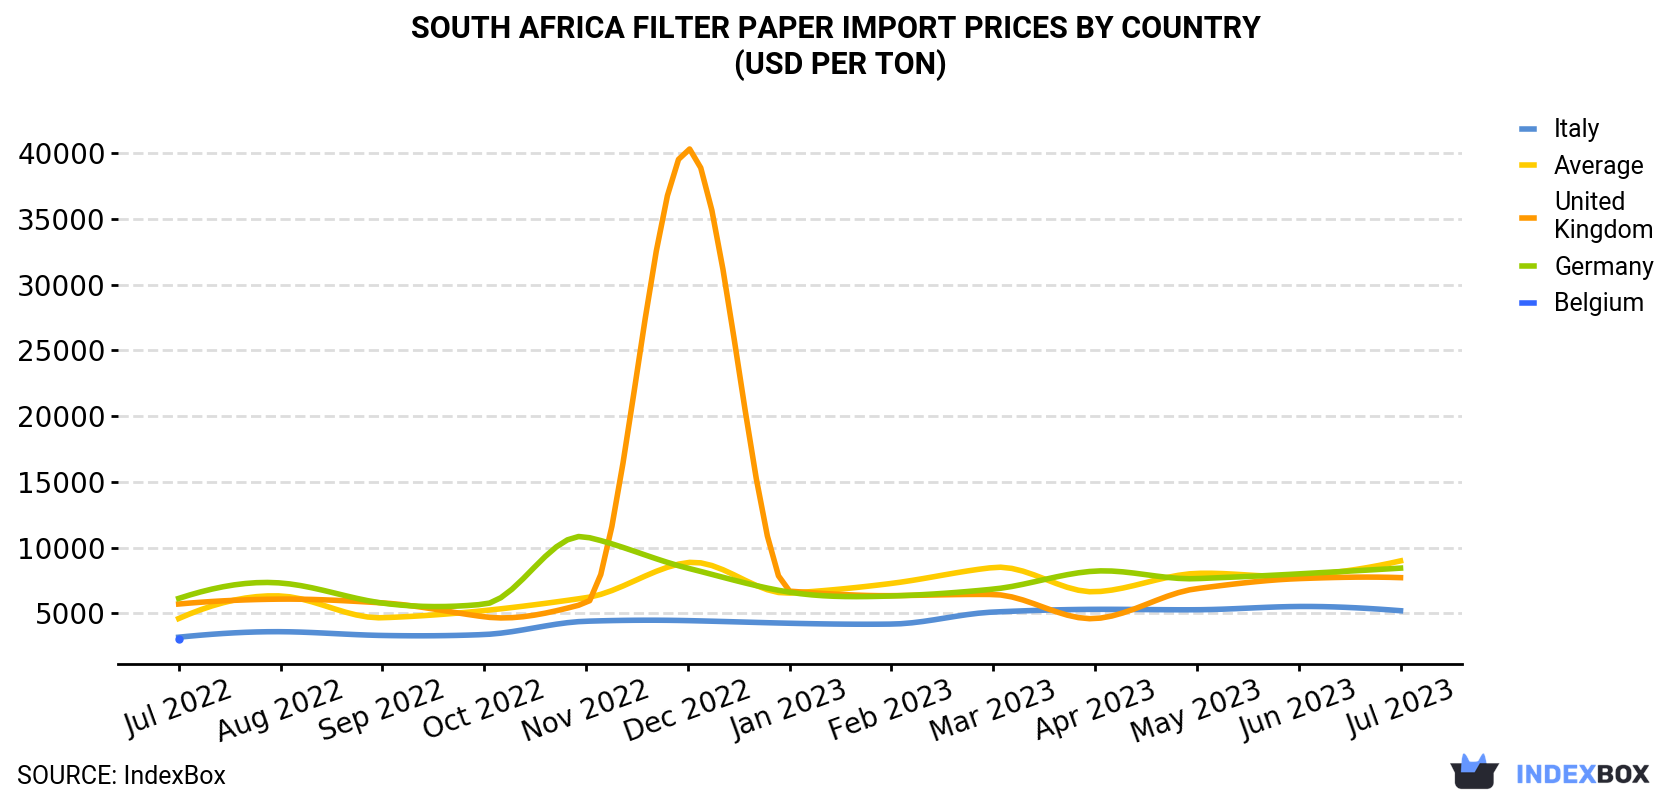 South Africa Filter Paper Import Prices By Country (USD Per Ton)